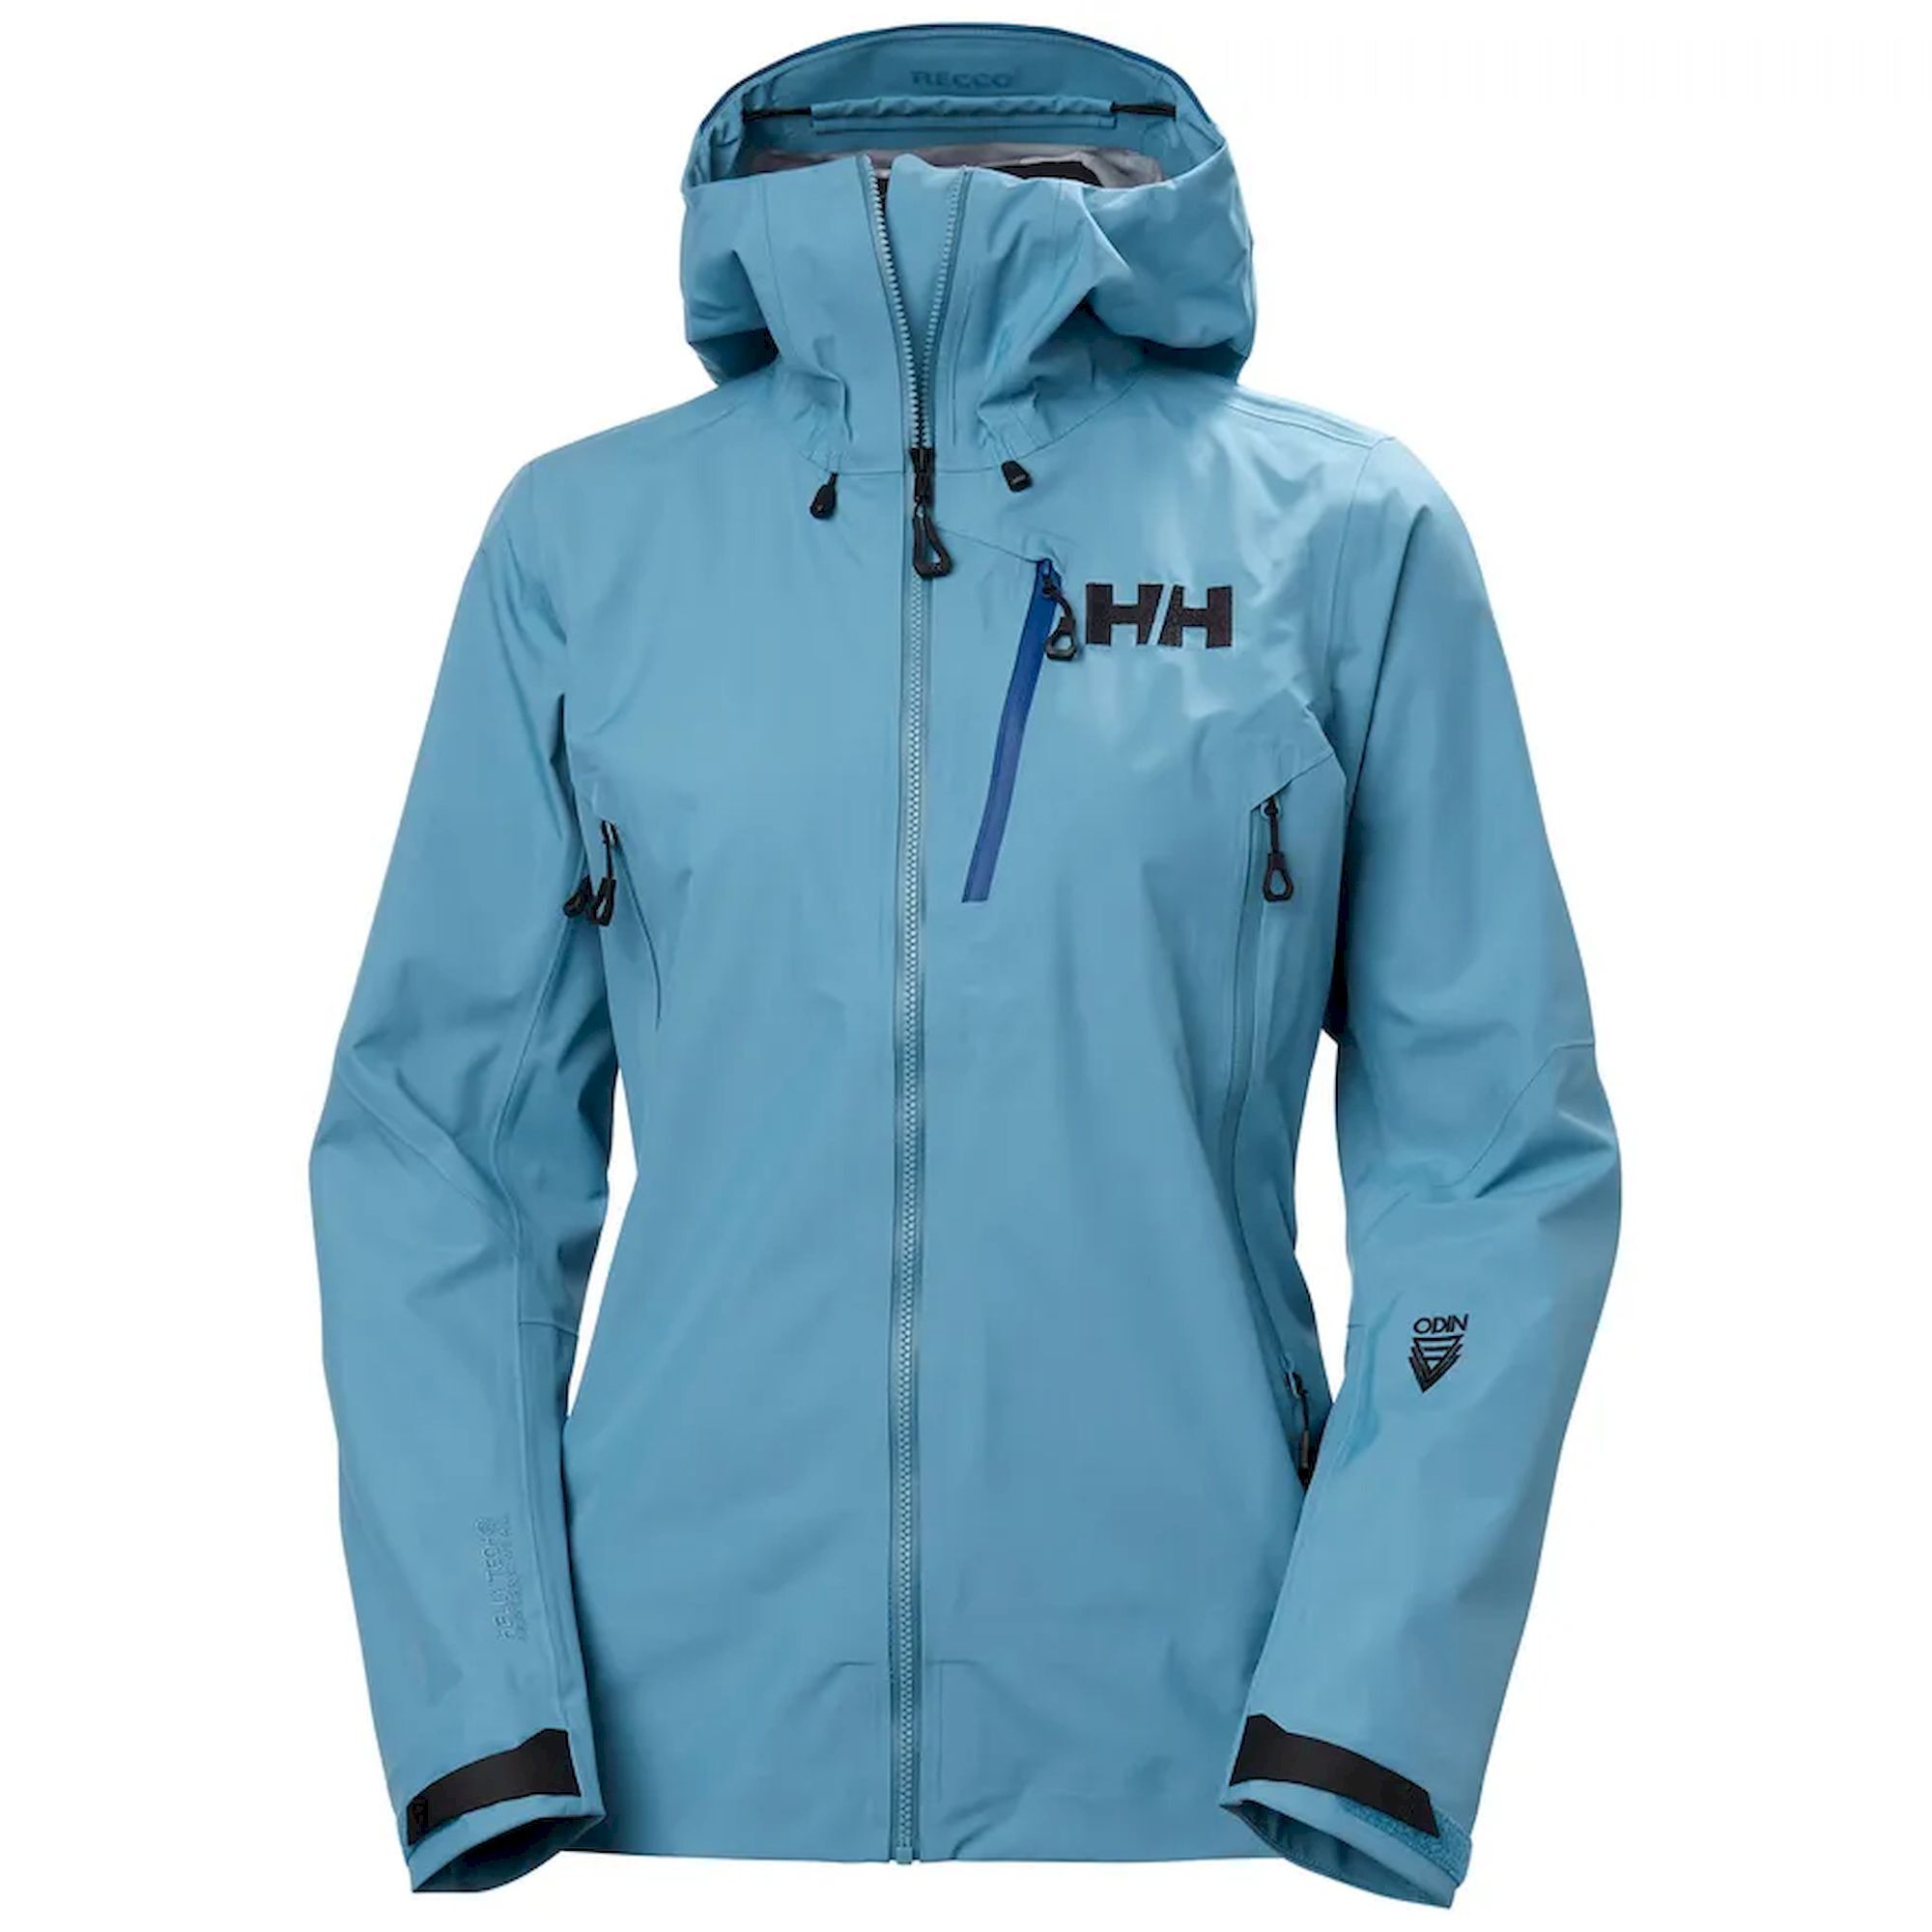 https://images.hardloop.fr/451822/helly-hansen-odin-9-worlds-20-jacket-chaqueta-impermeable-mujer.jpg?w=auto&h=auto&q=80